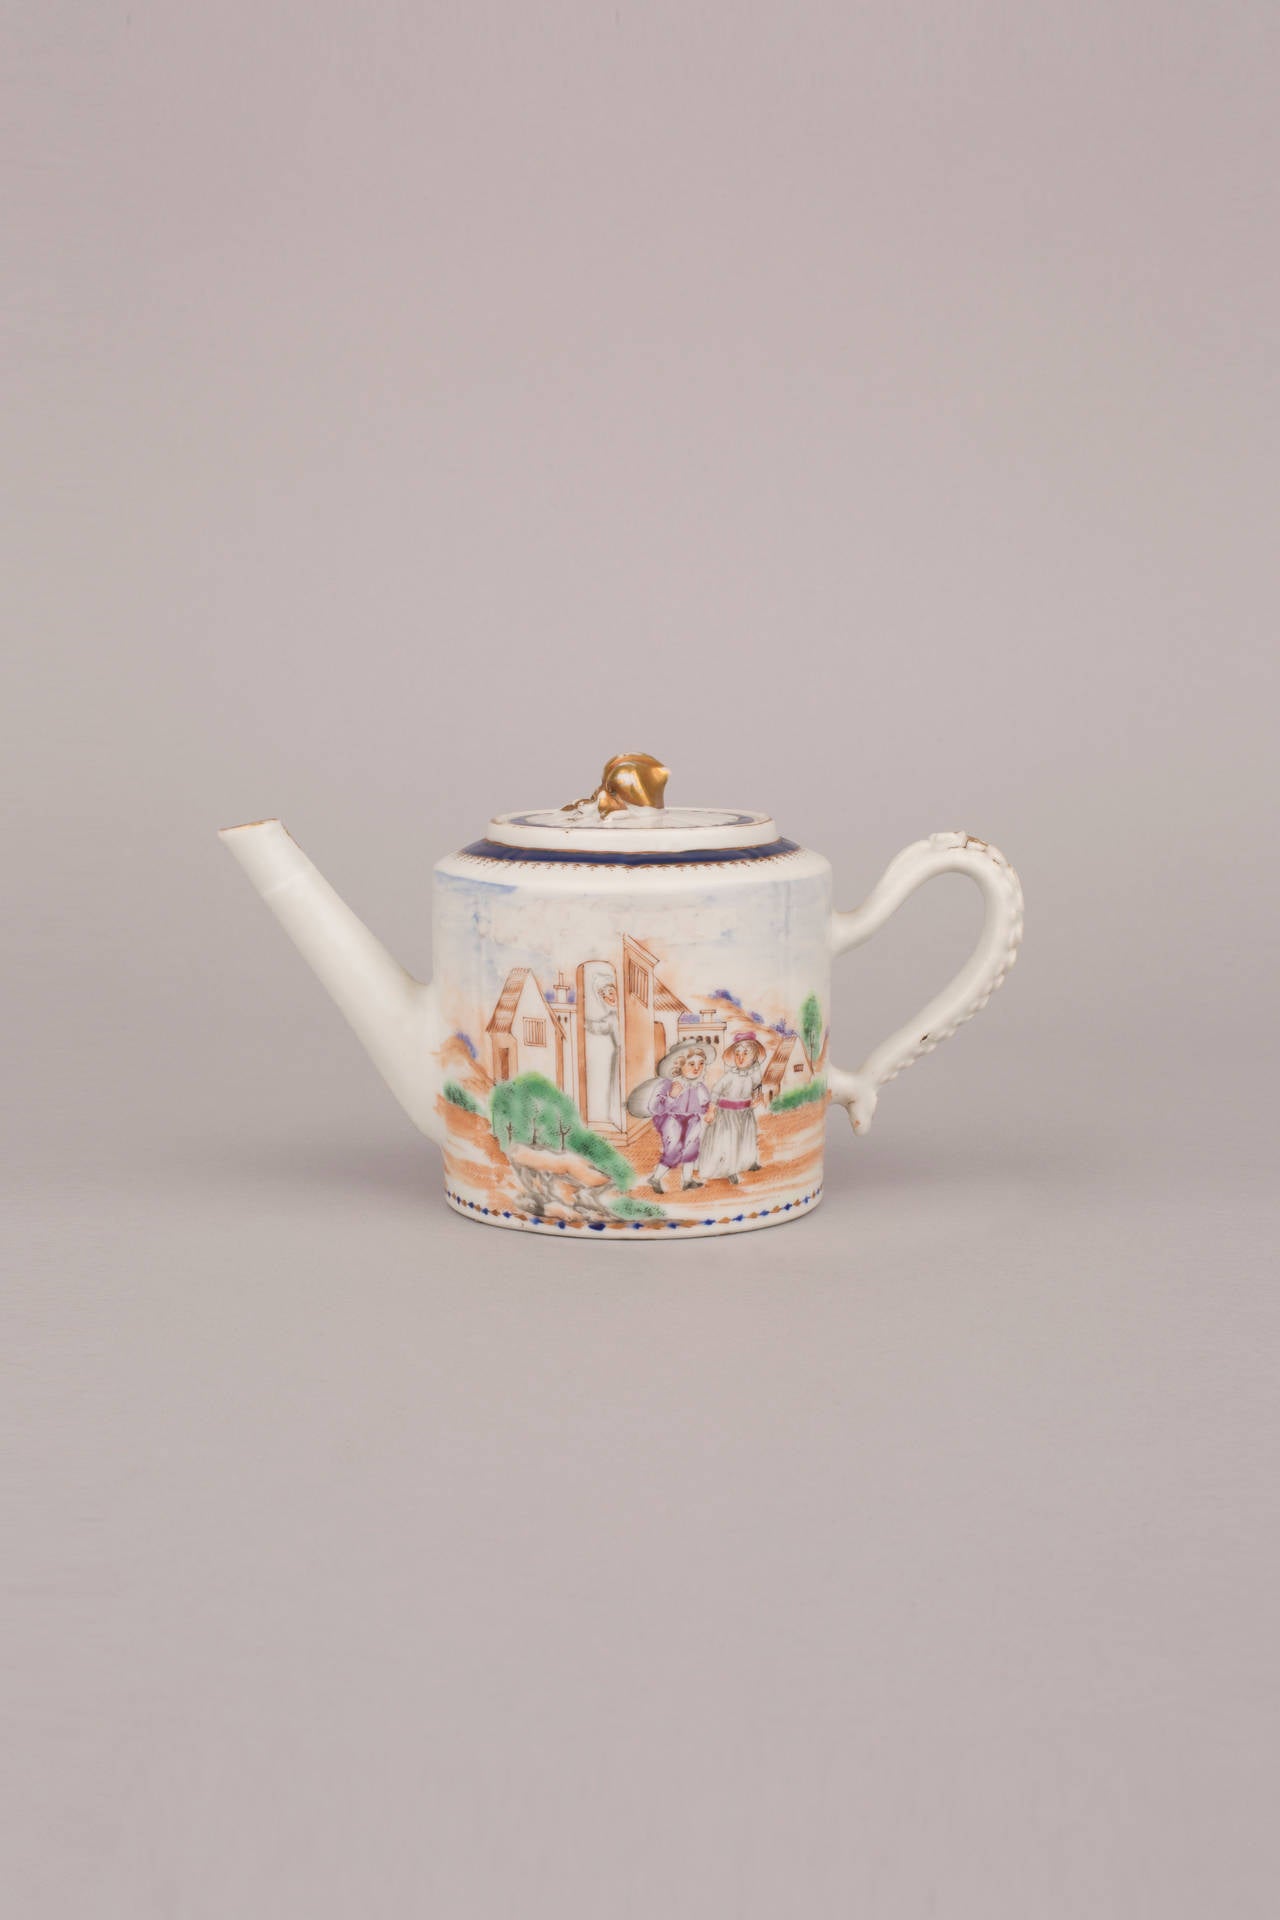 Famille rose miniature cylindrical fluted teapot and cover, painted on both sides with the scene ‘Leaving for School’ with a young girl and a boy holding a sack over his shoulder leaving their home with their mother at the door seeing them off, with